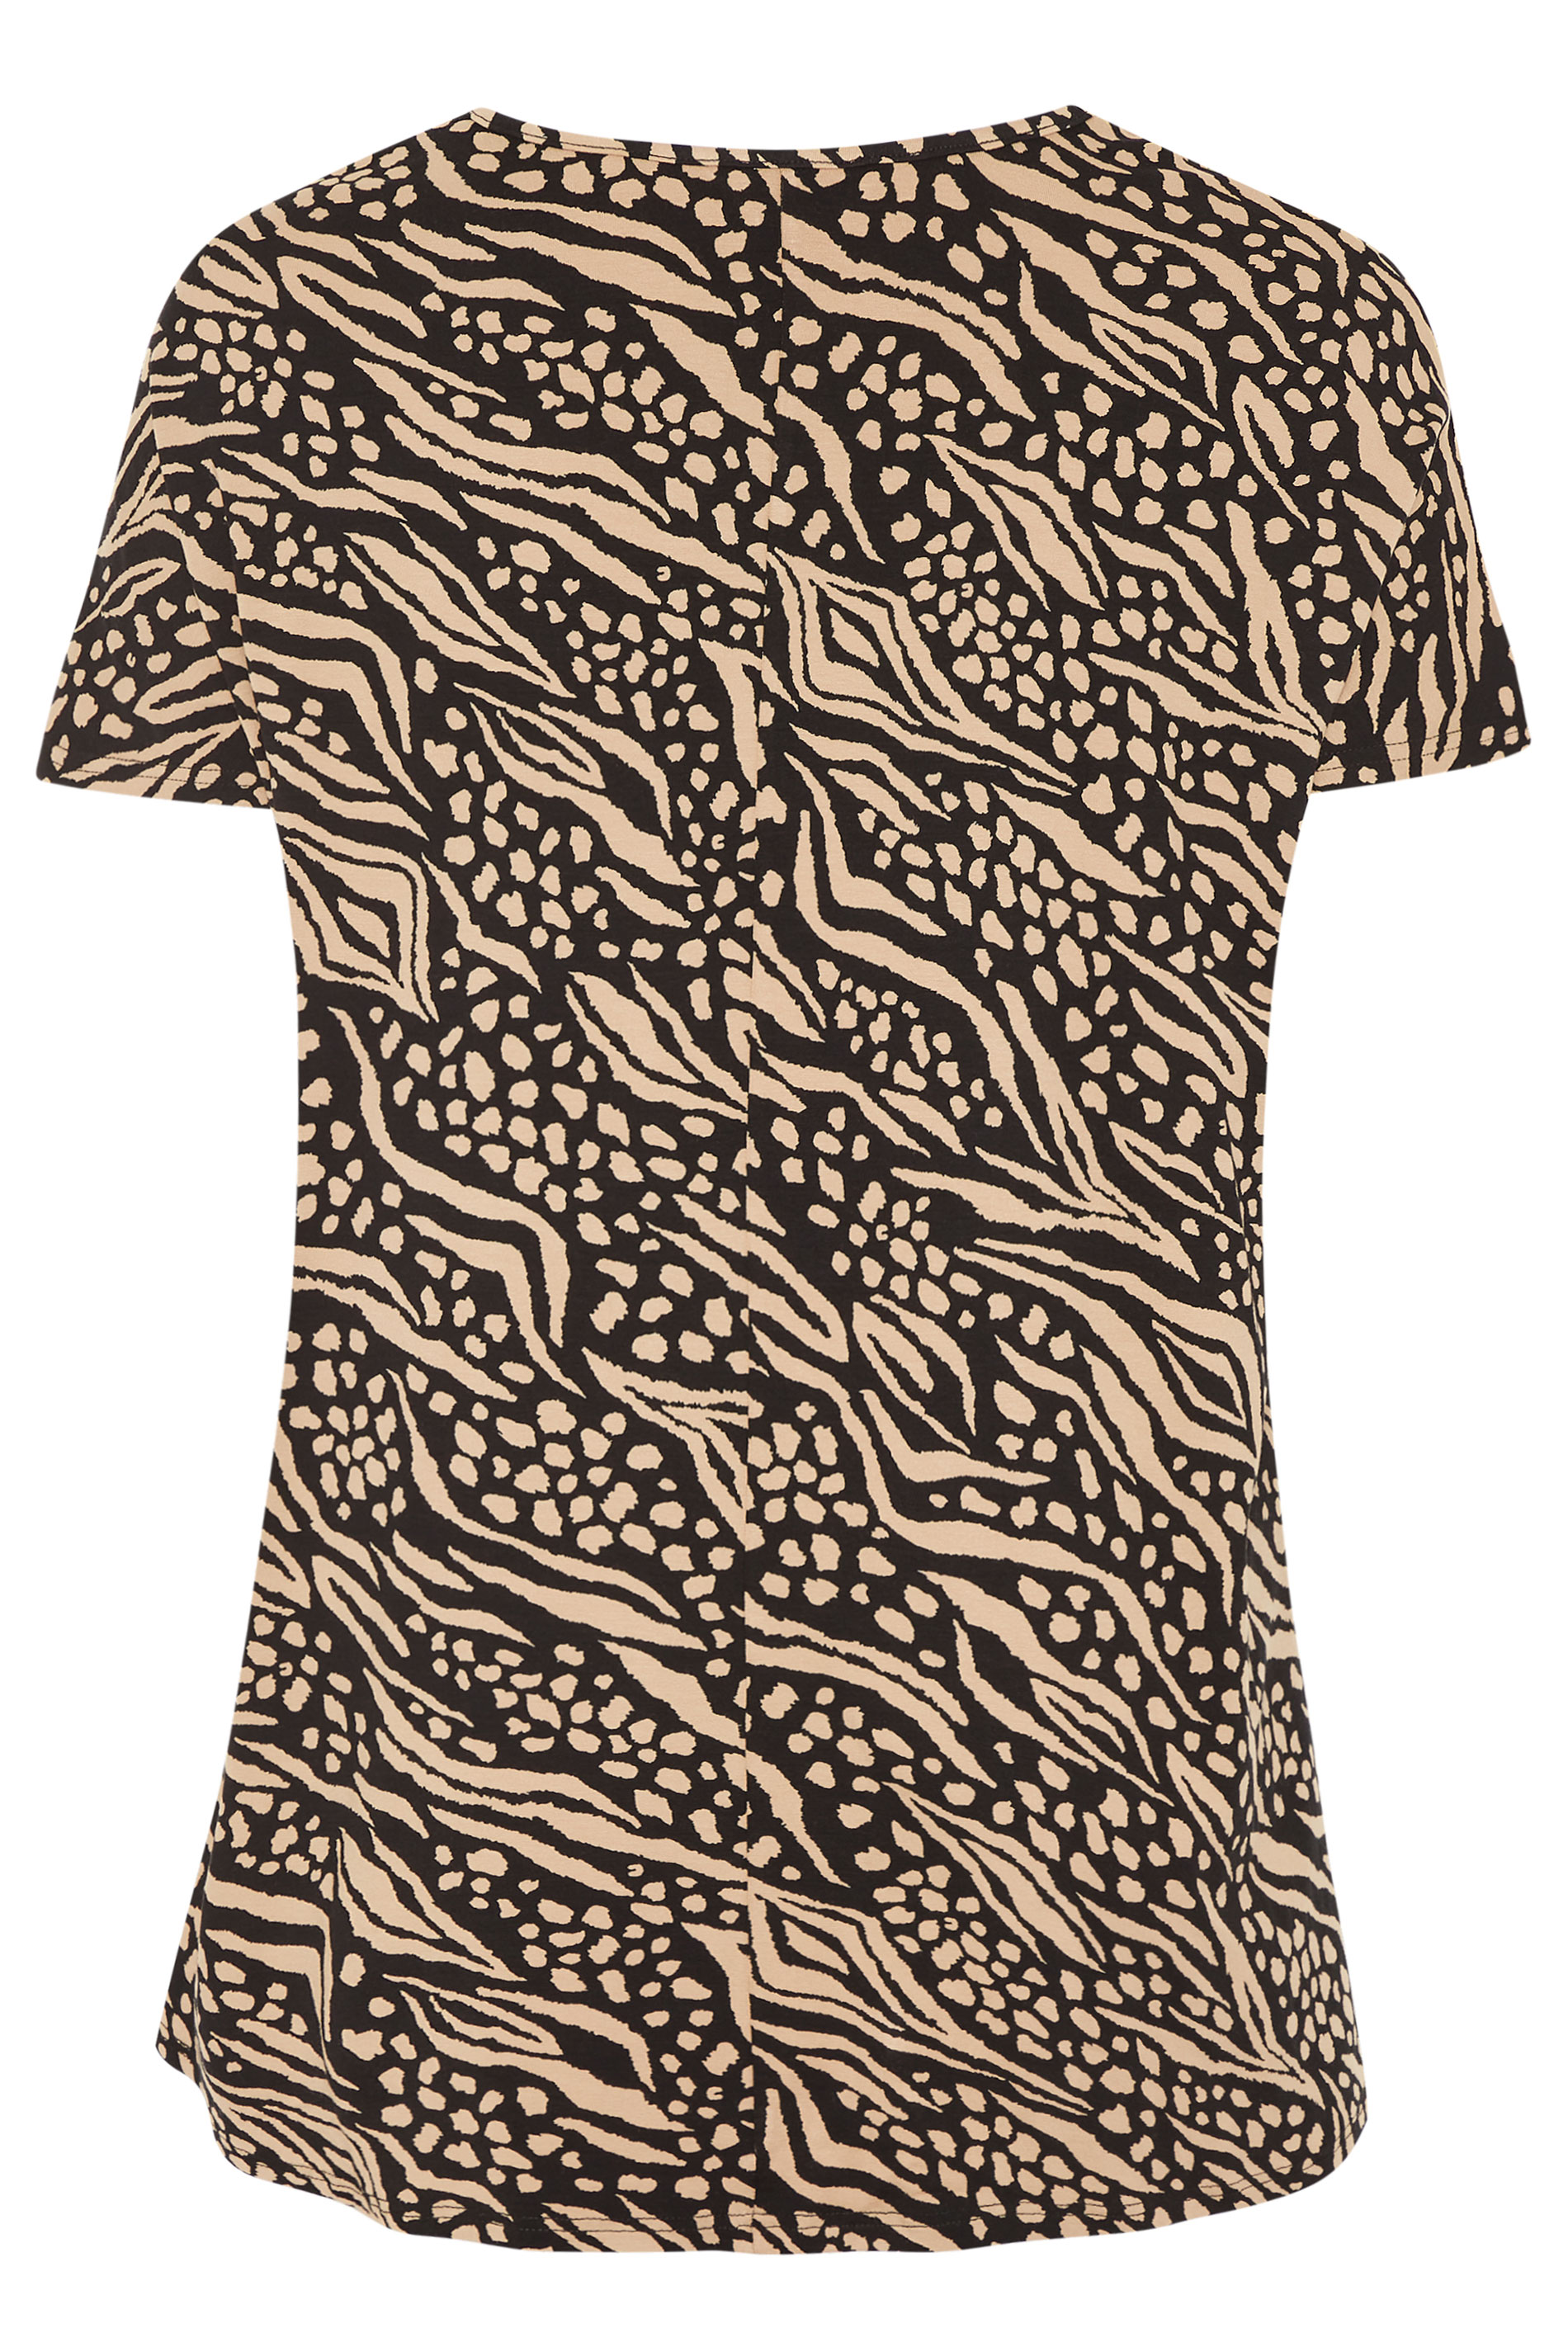 Brown Zebra Print Grown on Sleeve T-Shirt | Yours Clothing